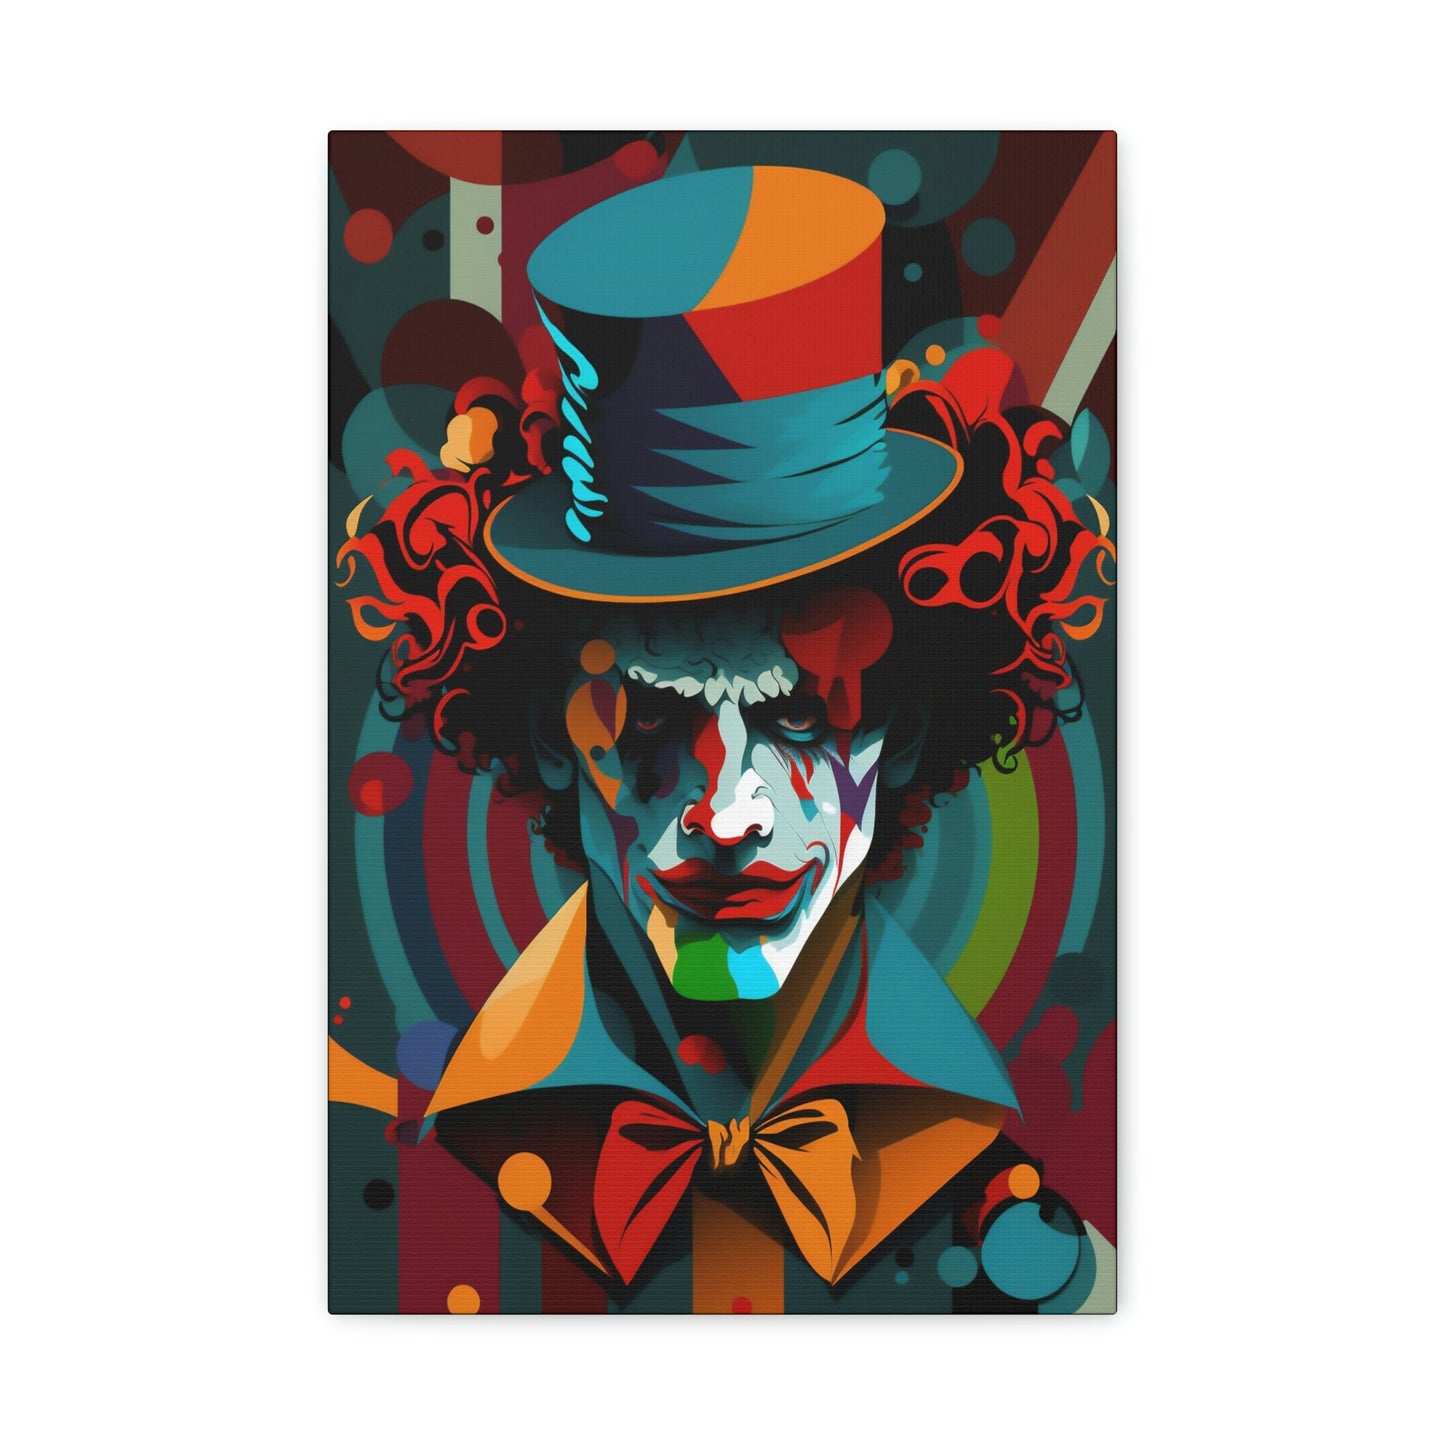 Crazy Insane Evil Spooky Clowns – Mr. Terrifier the Clown from Hell Canvas Gallery Wraps